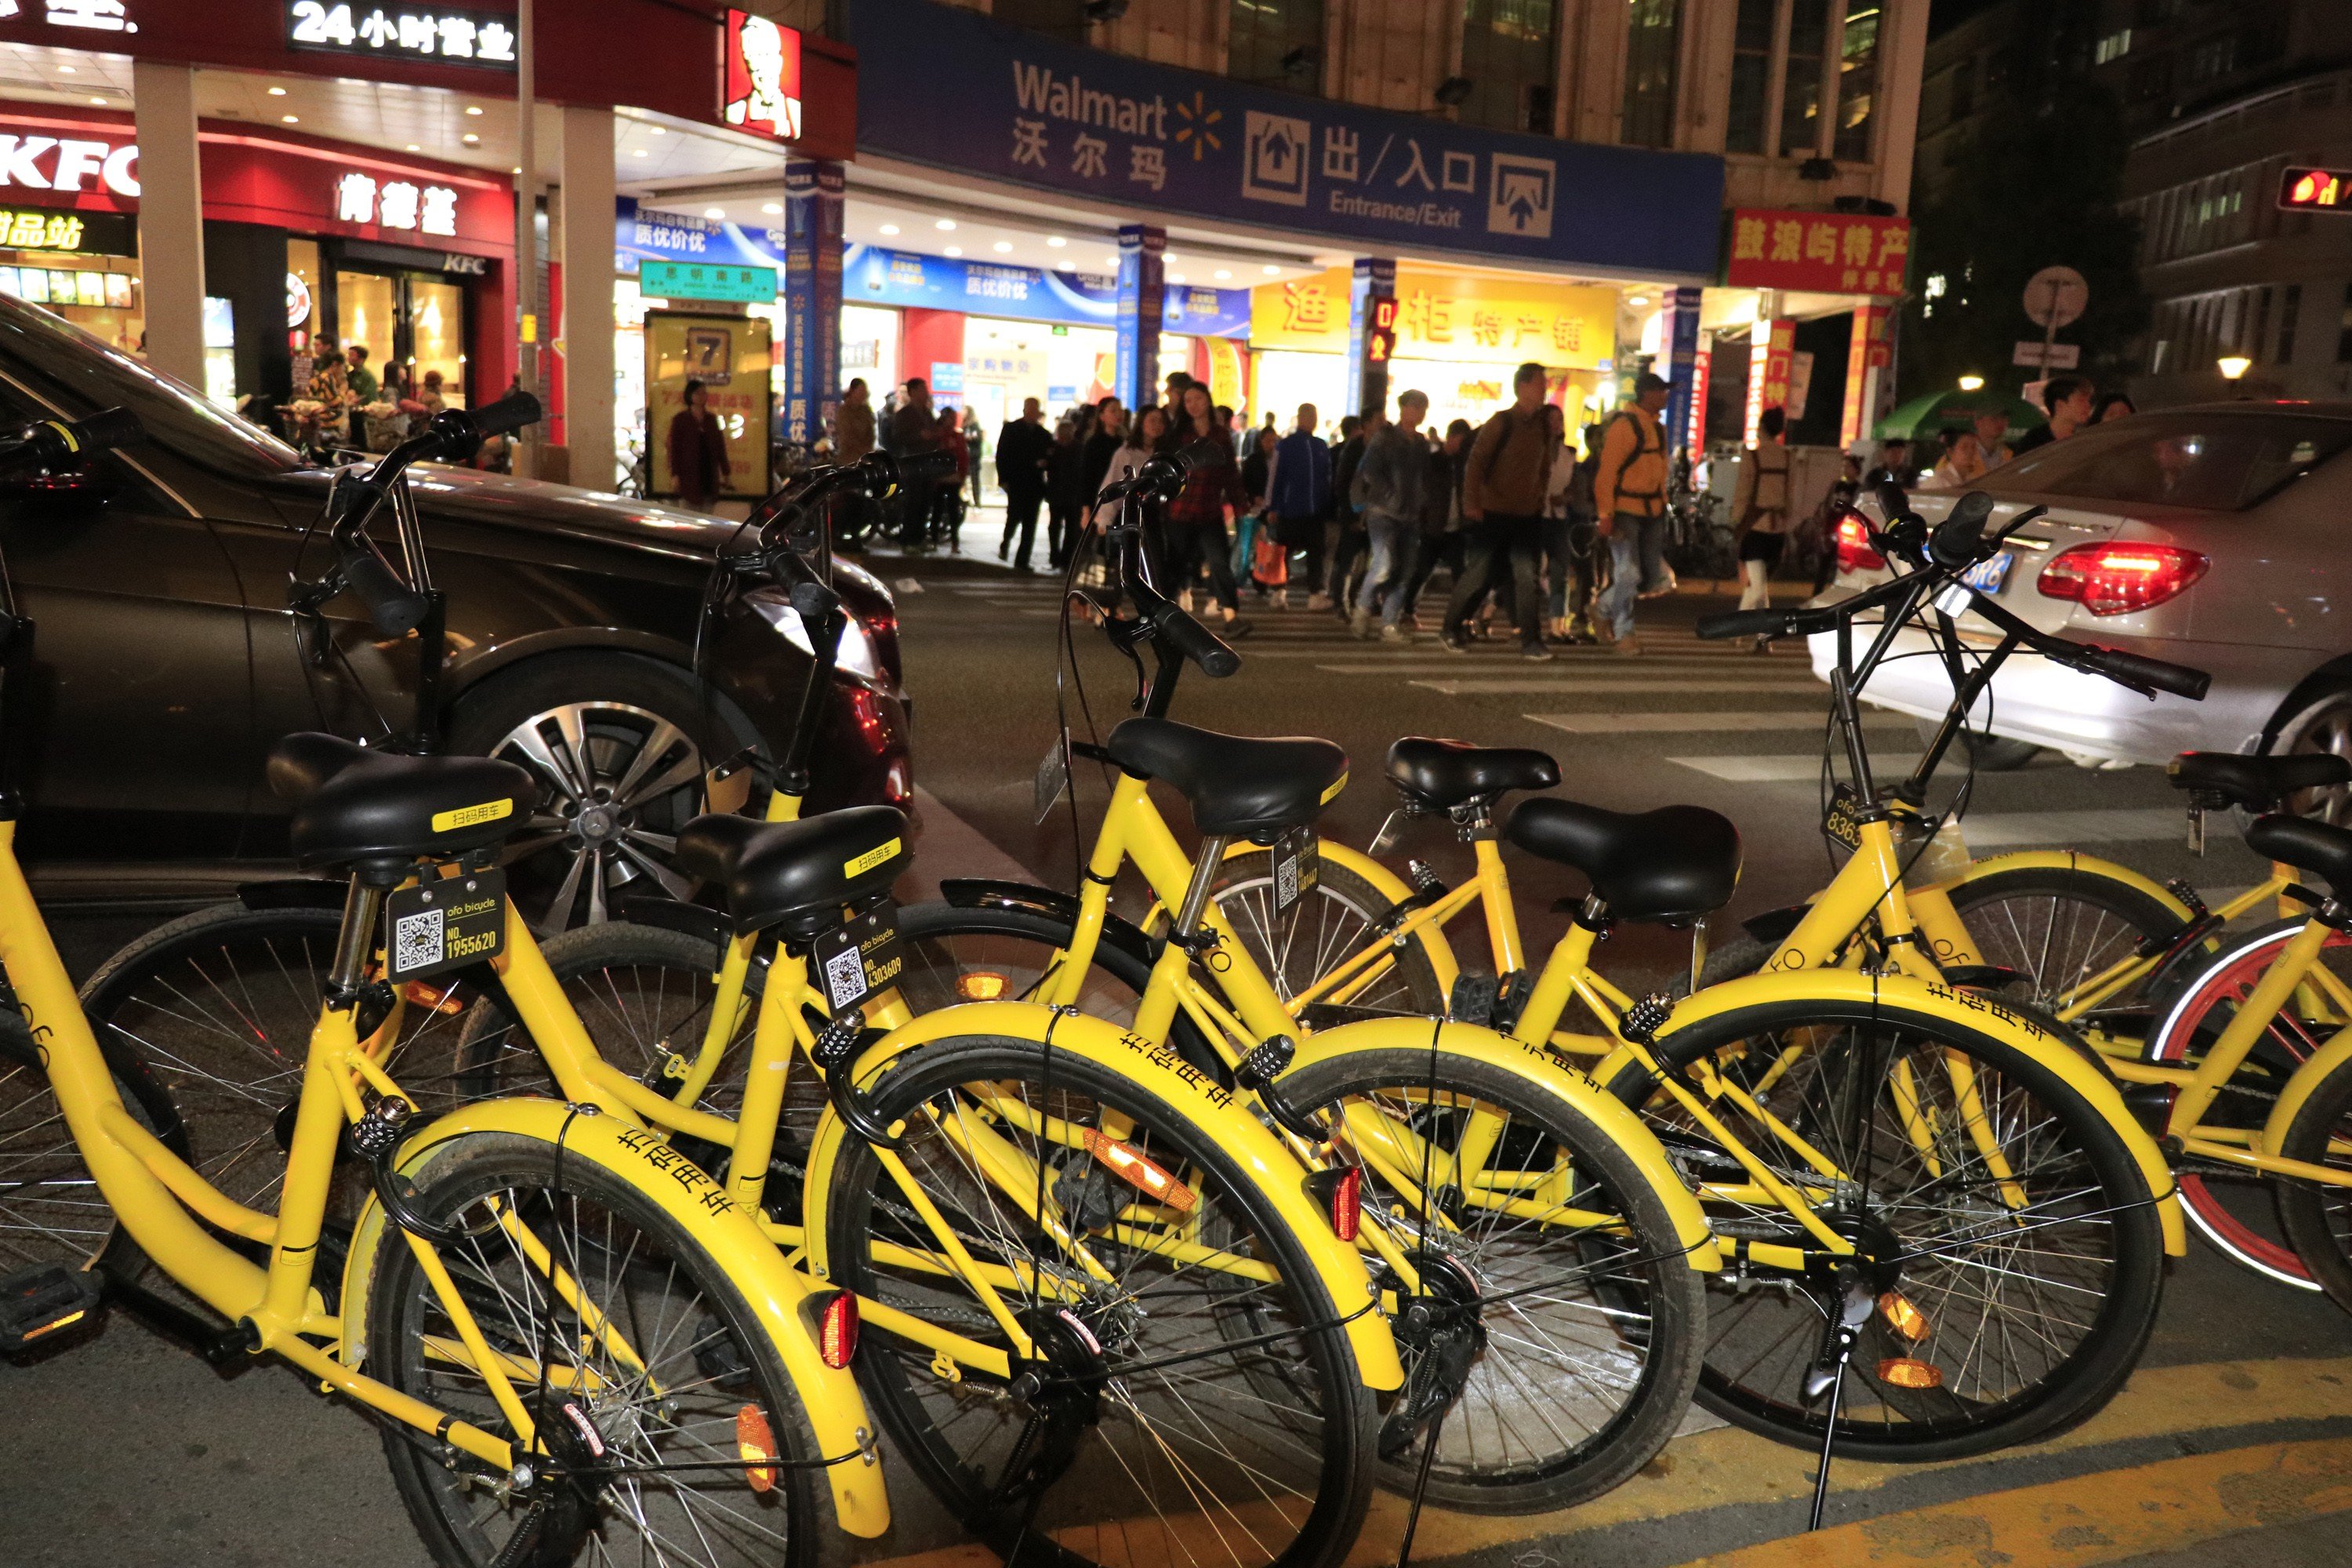 Bike-sharing companies face increasing competition and criticism in Xiamen. Photo: ImagineChina